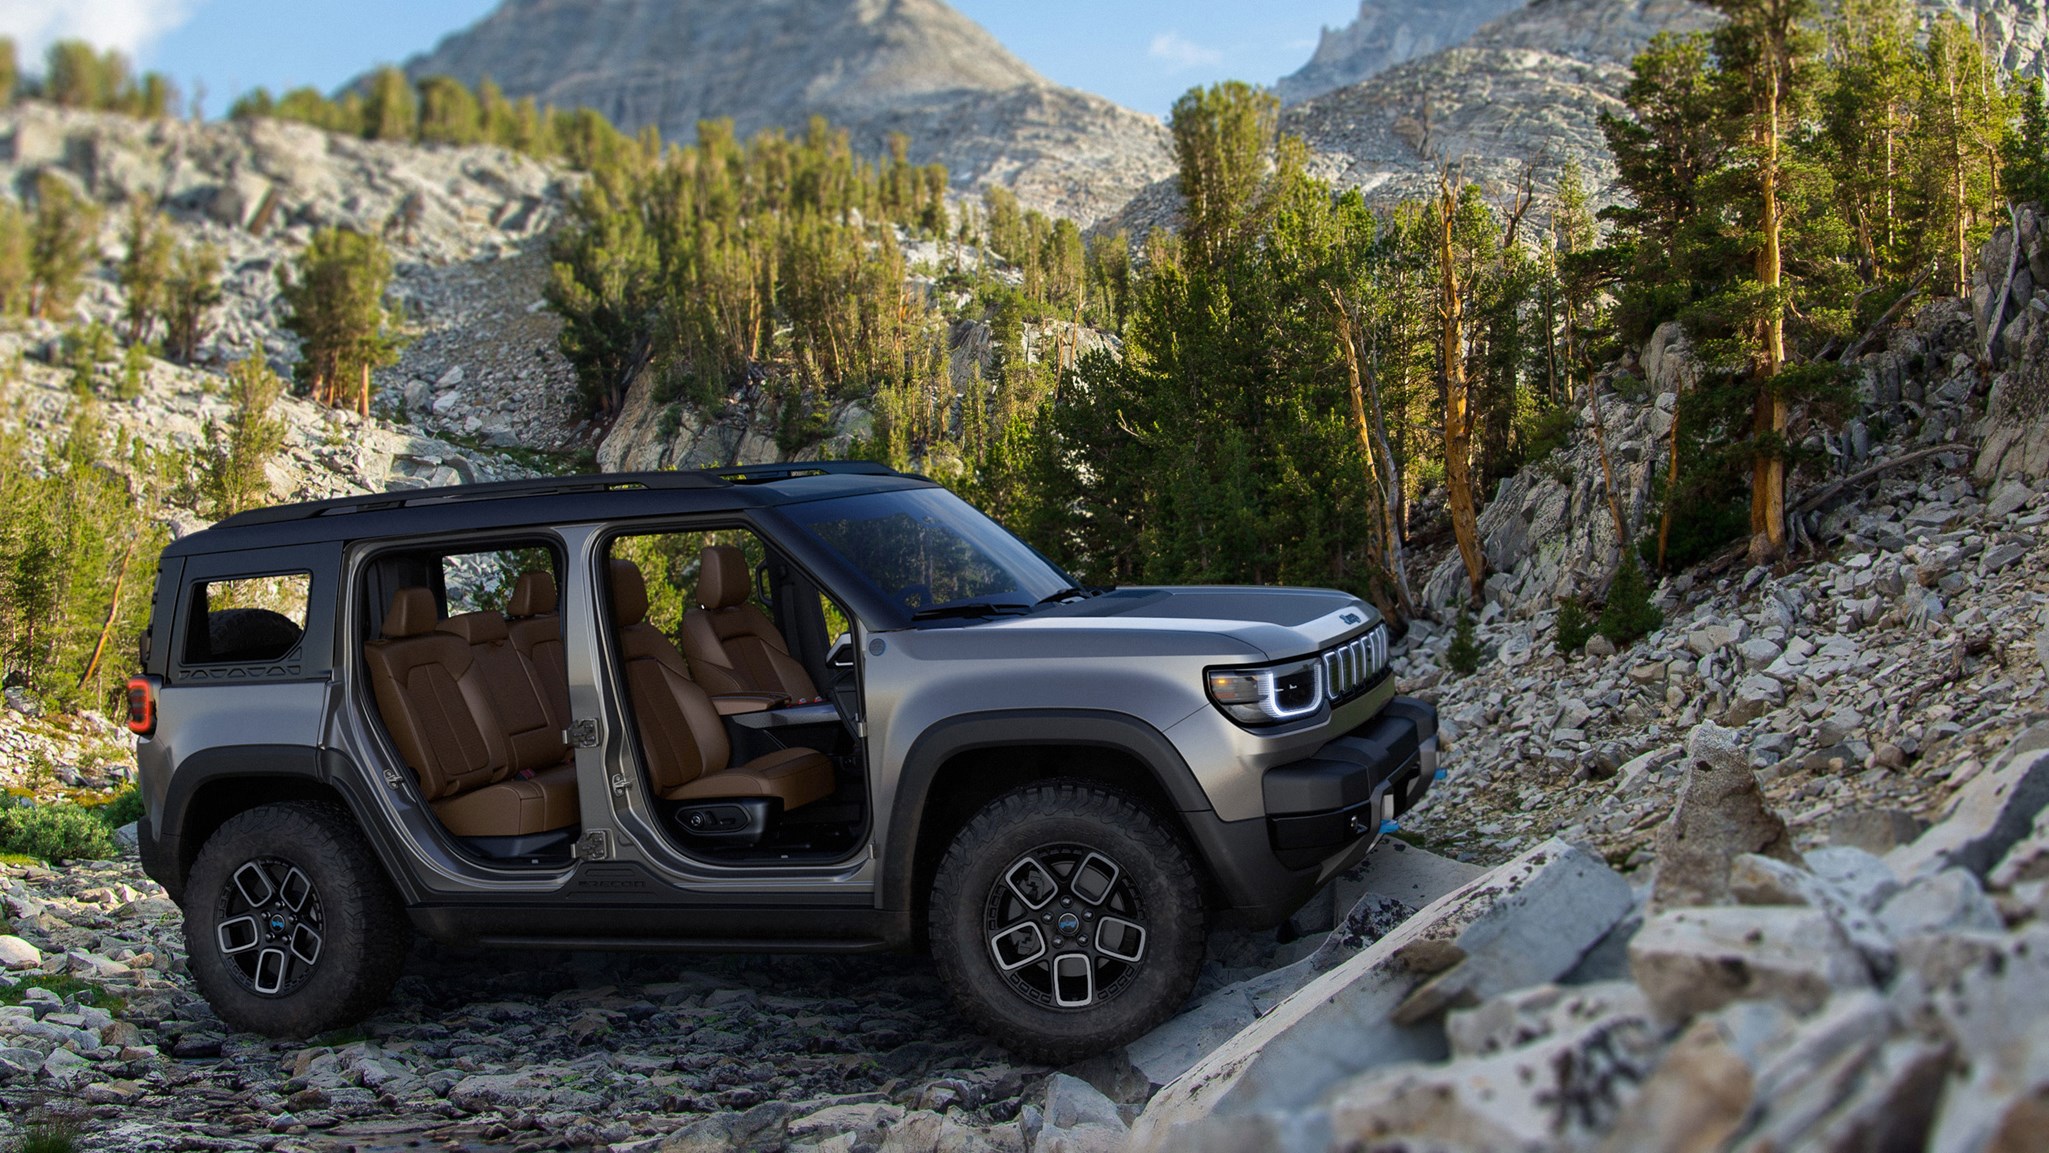 NEW Jeep Renegade Trailhawk: Is This A Real Jeep? 